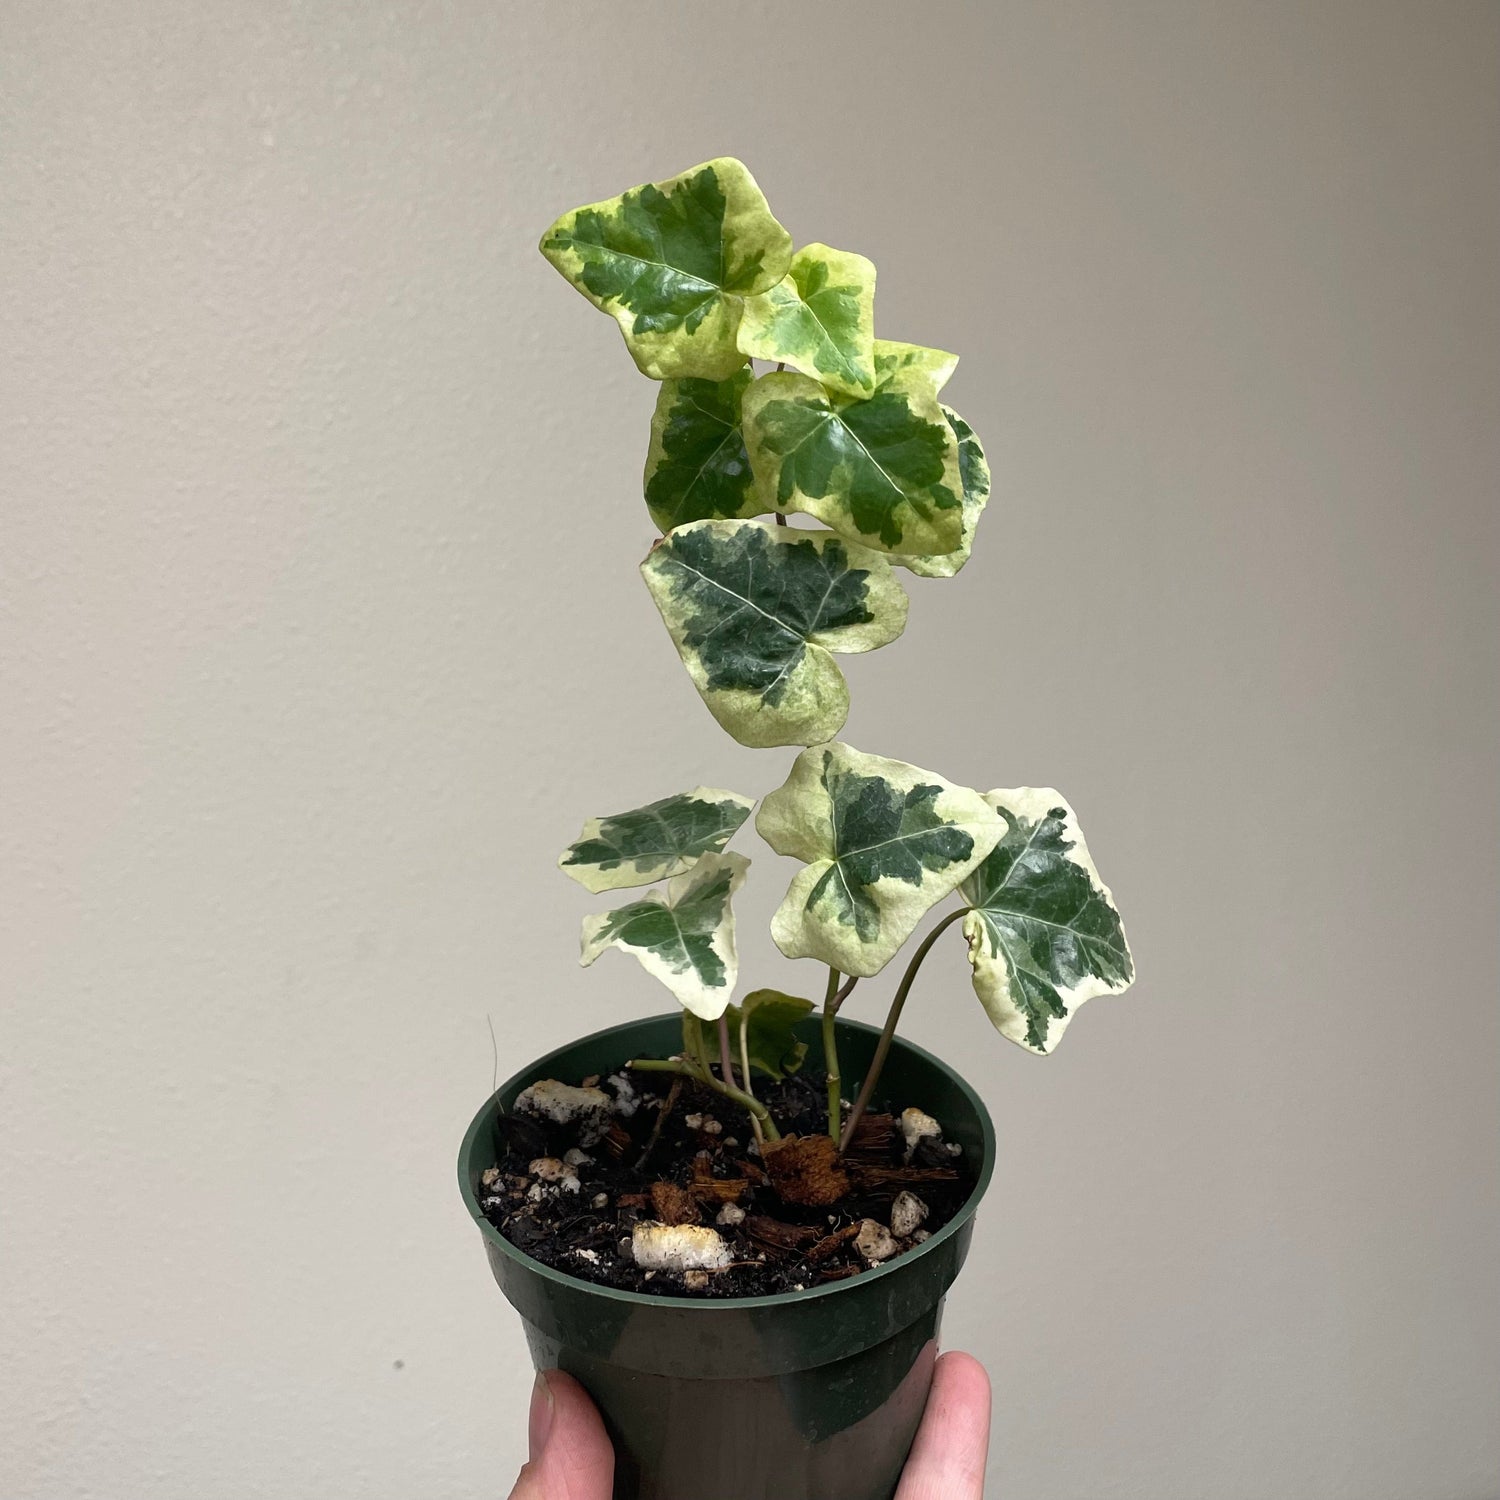 Urban Sprouts Plant 4" in nursery pot English Ivy 'Anne Marie '